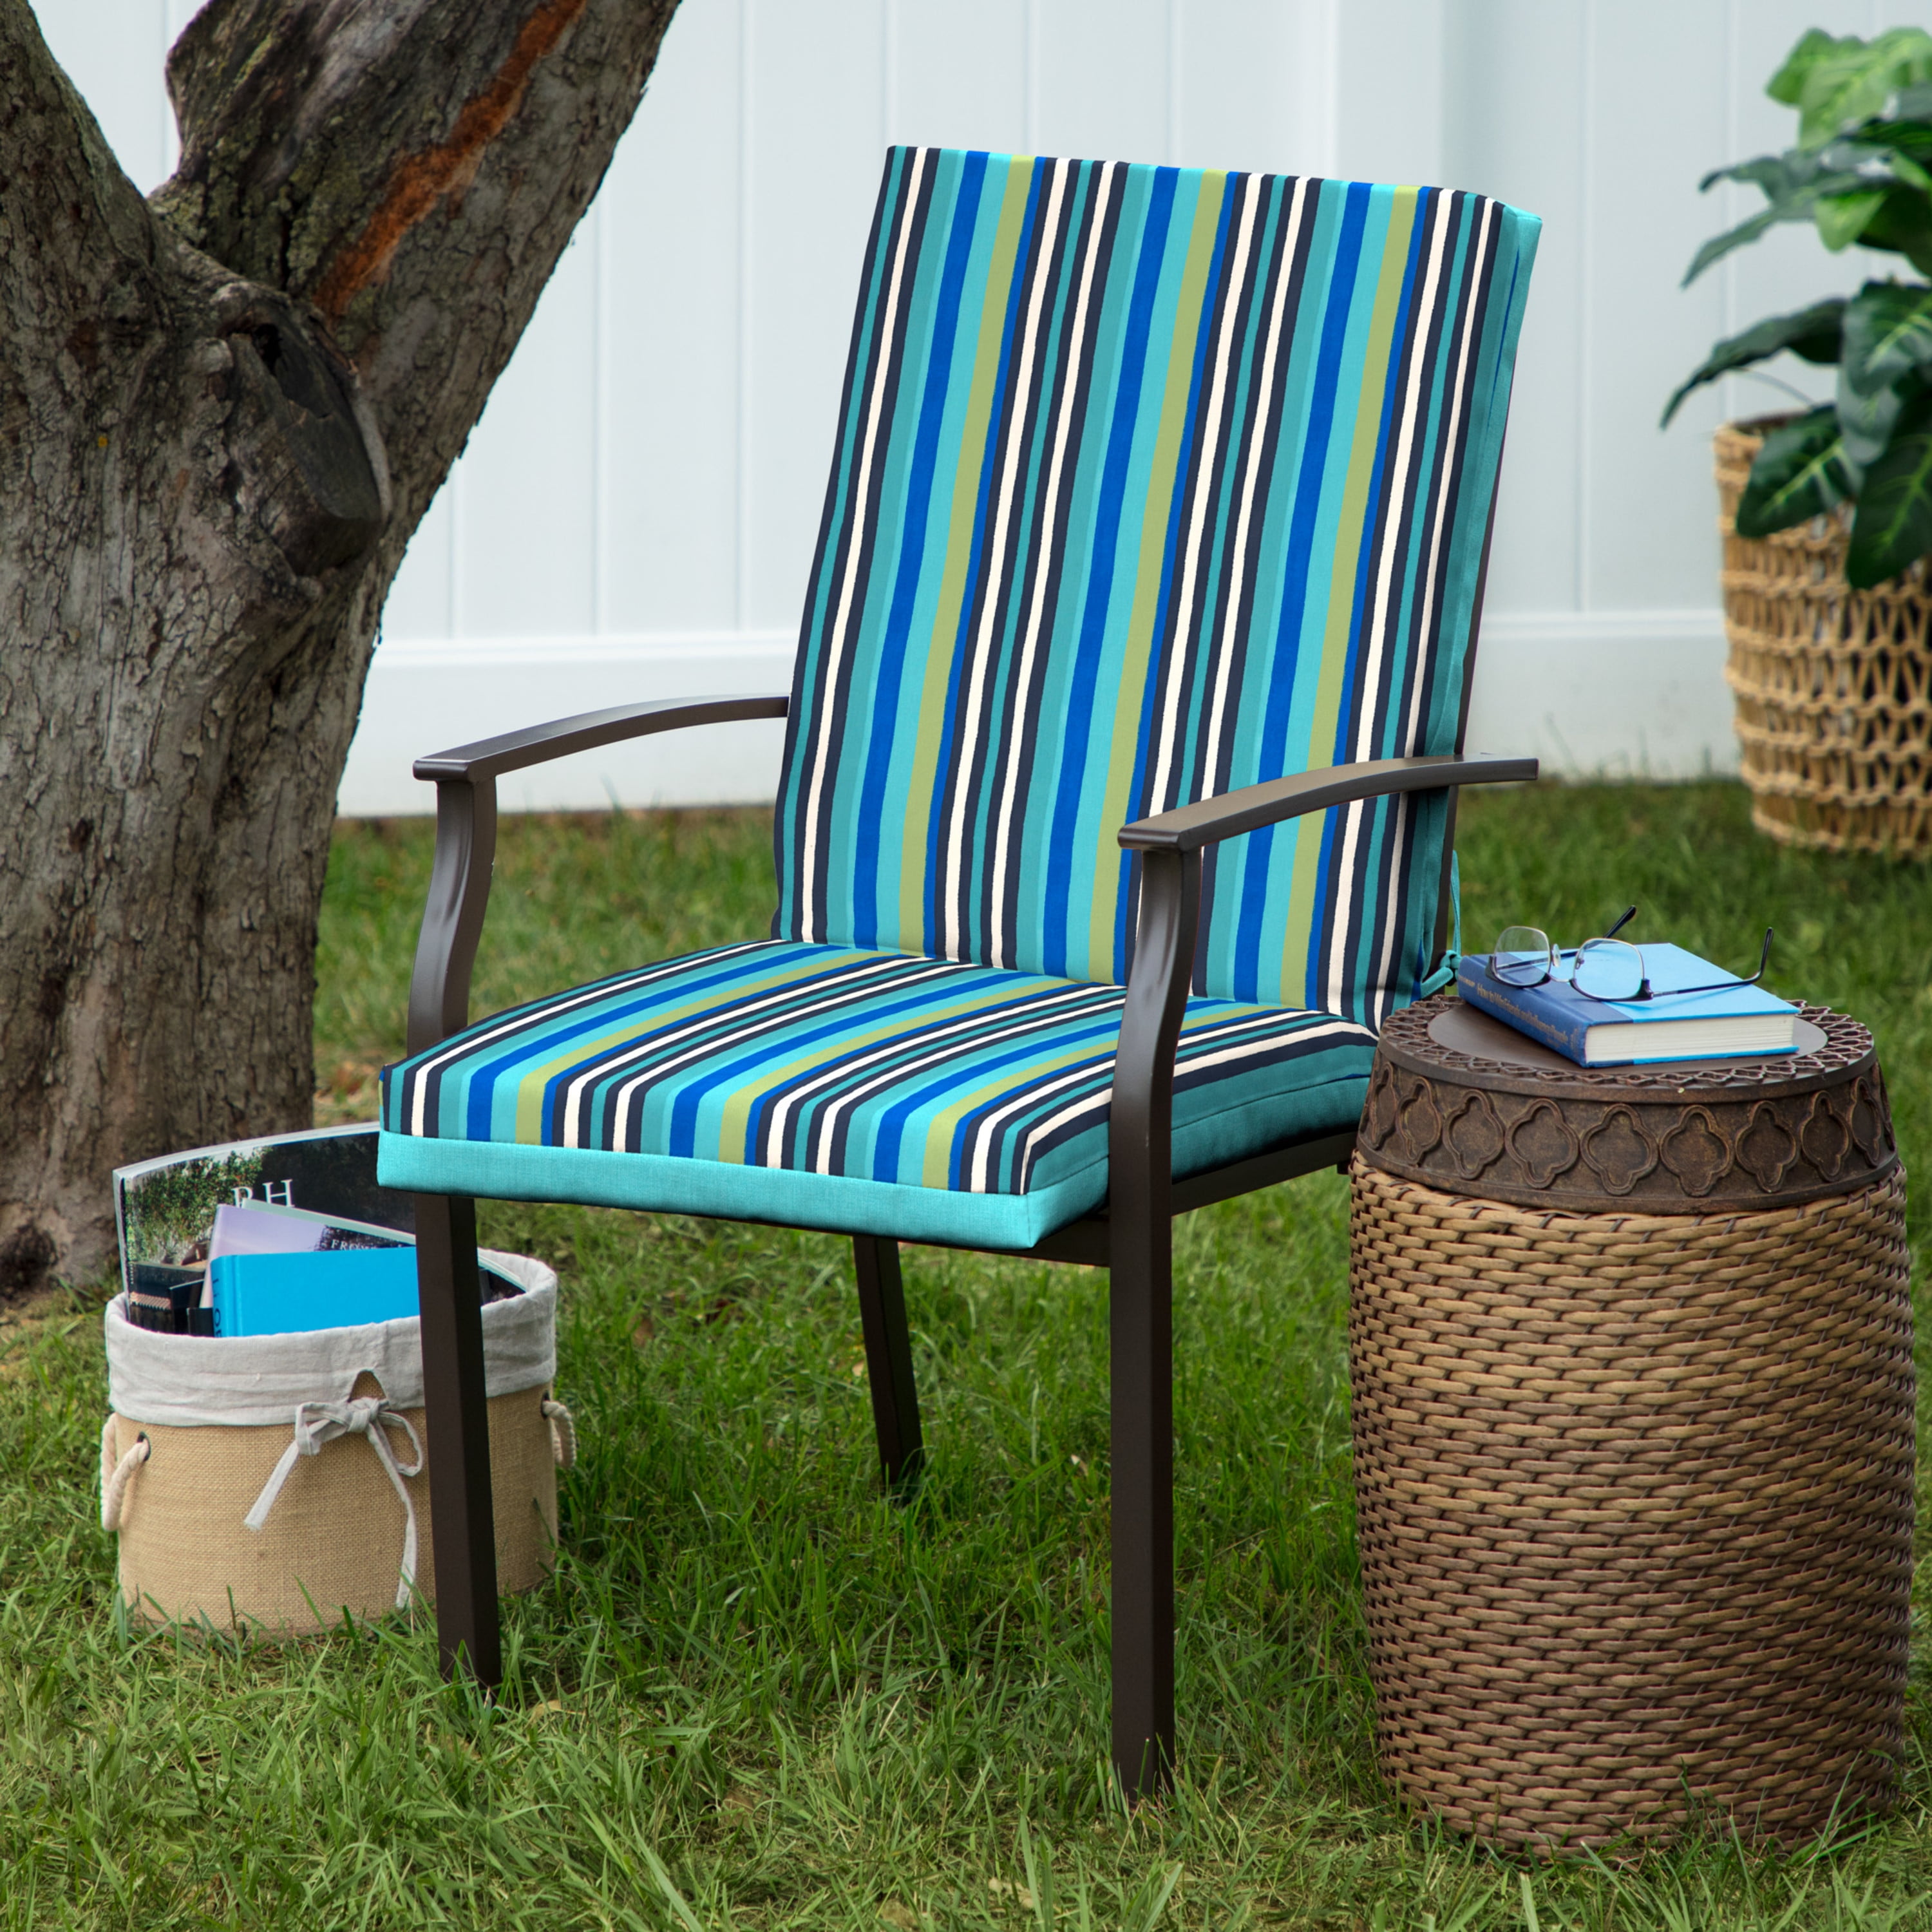 Mainstays 15.5 x 17 Turquoise Stripe Rectangle Outdoor Seat Pad (2 Pack)